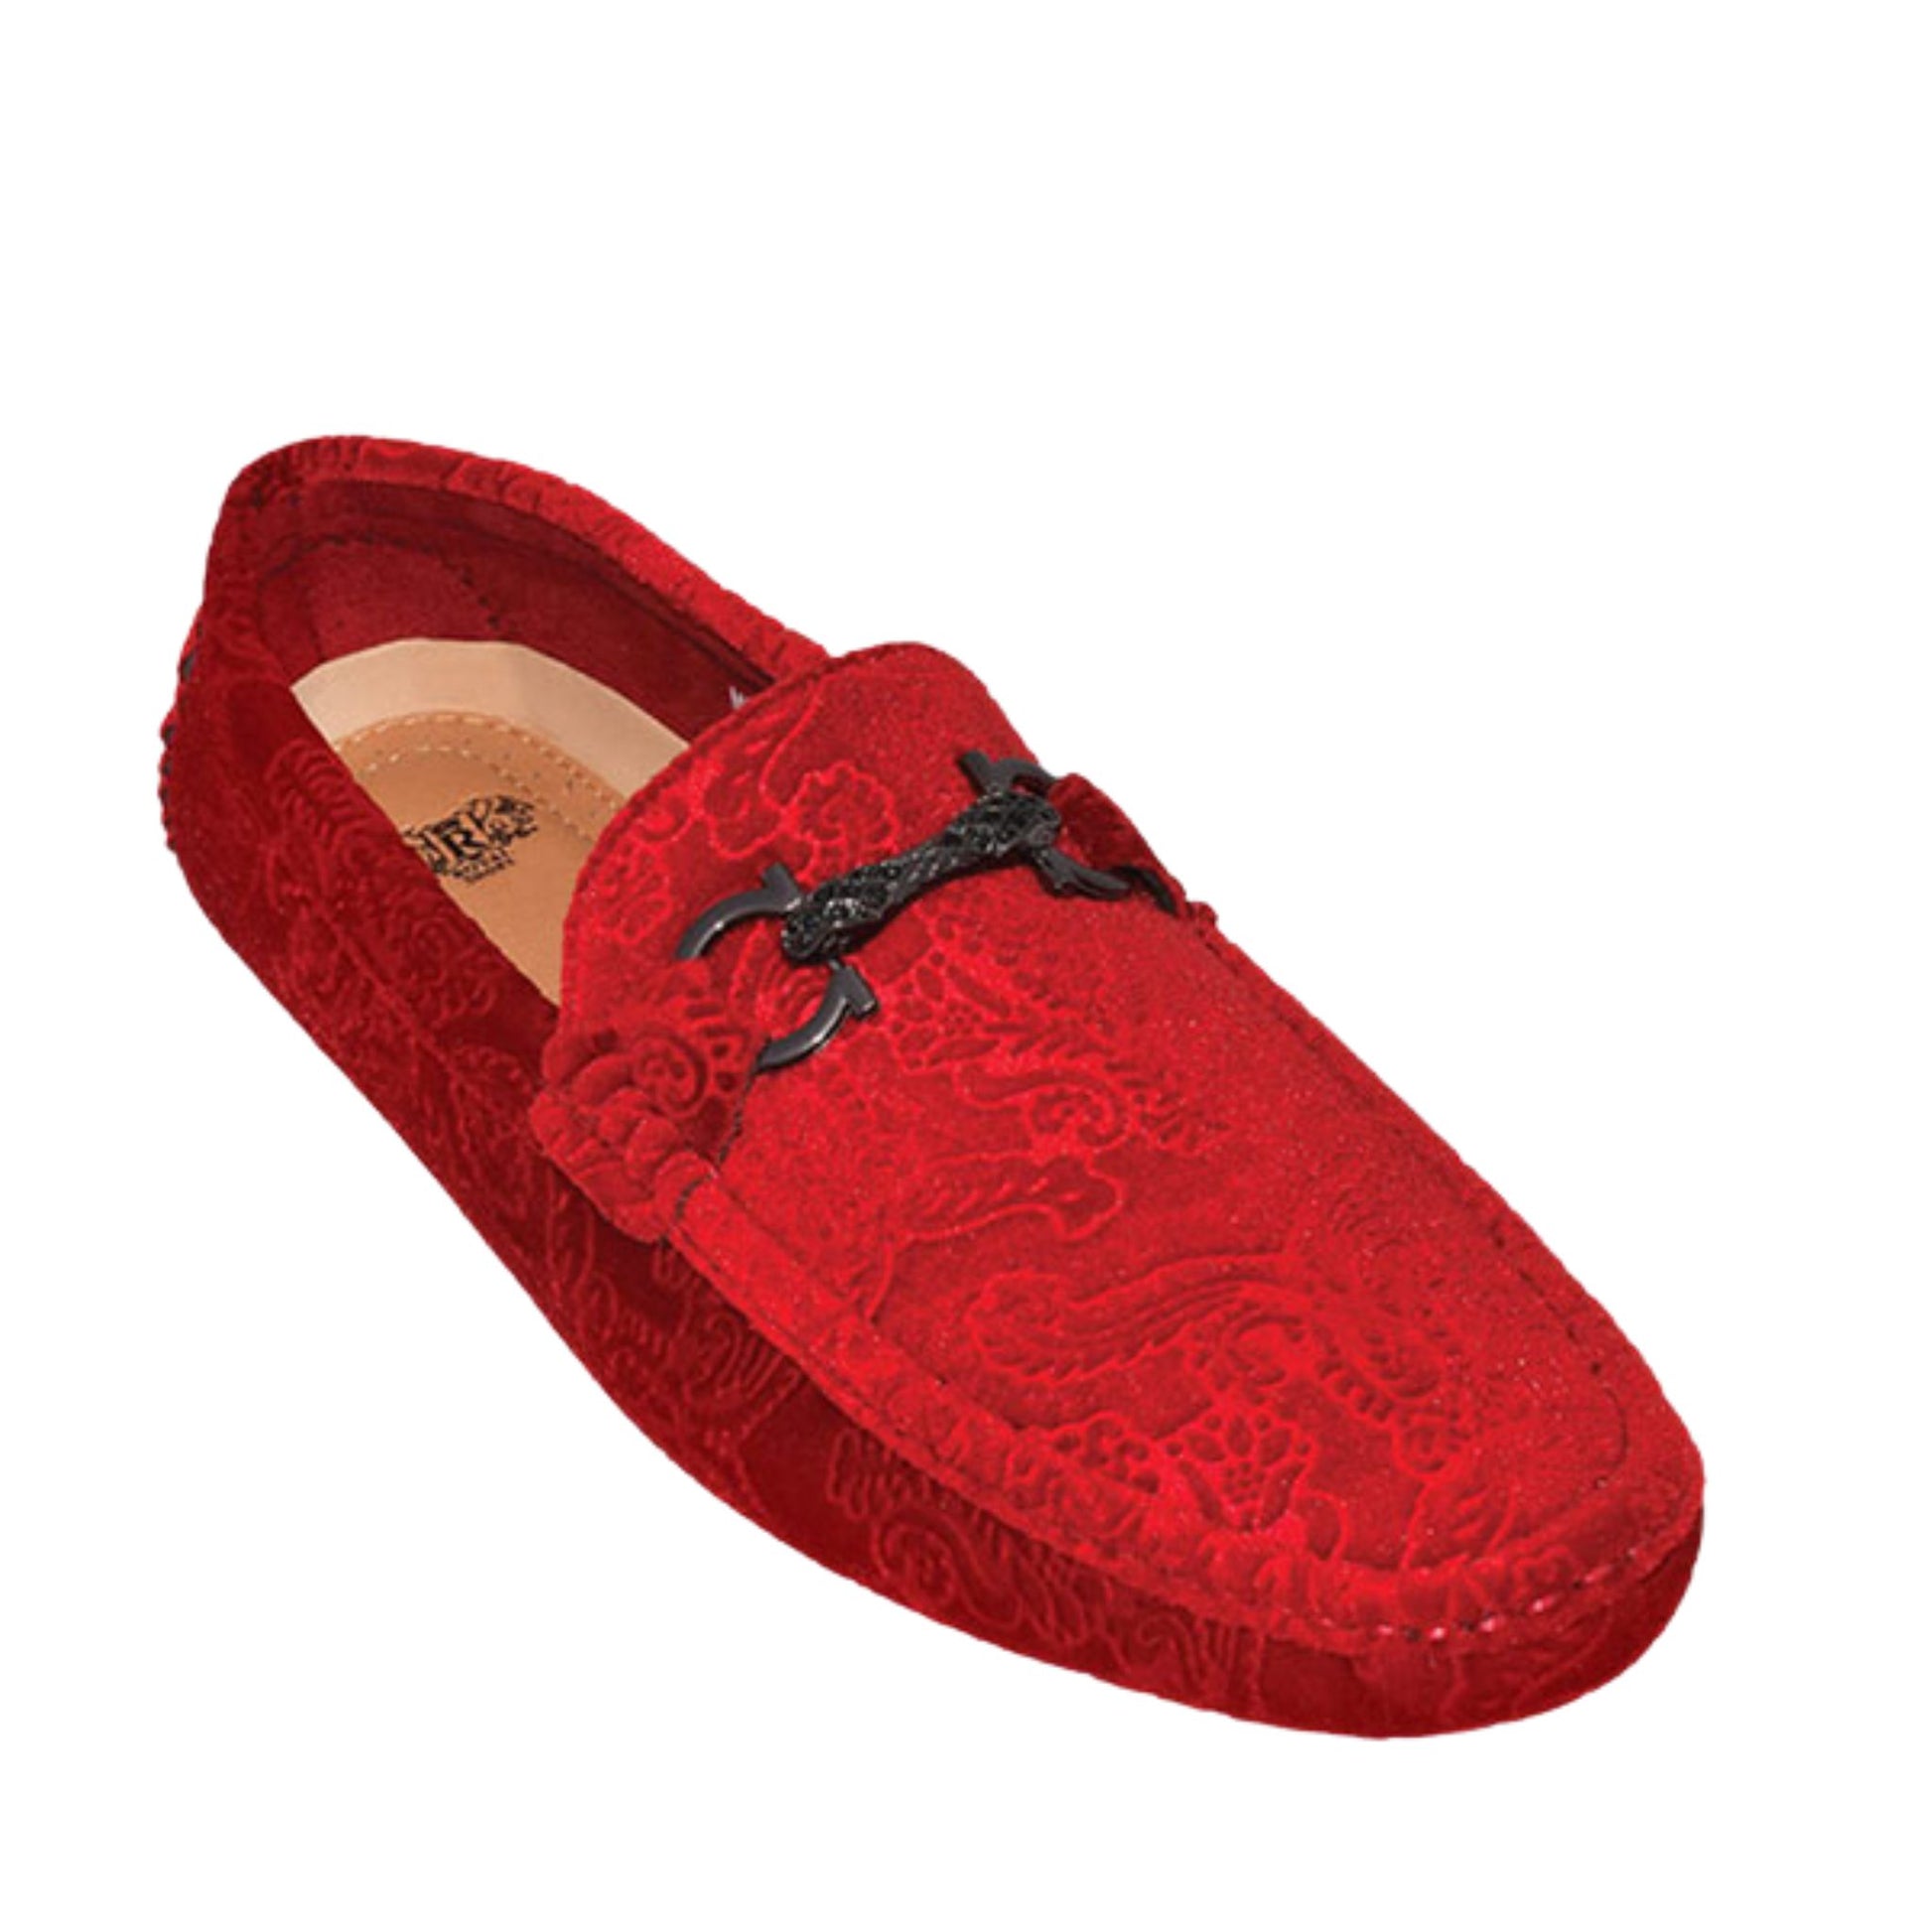 Elegant man wearing KCT Menswear's Red Velvet Paisley With Buckle Loafer, showcasing a fashionable and unique footwear option for any stylish ensemble